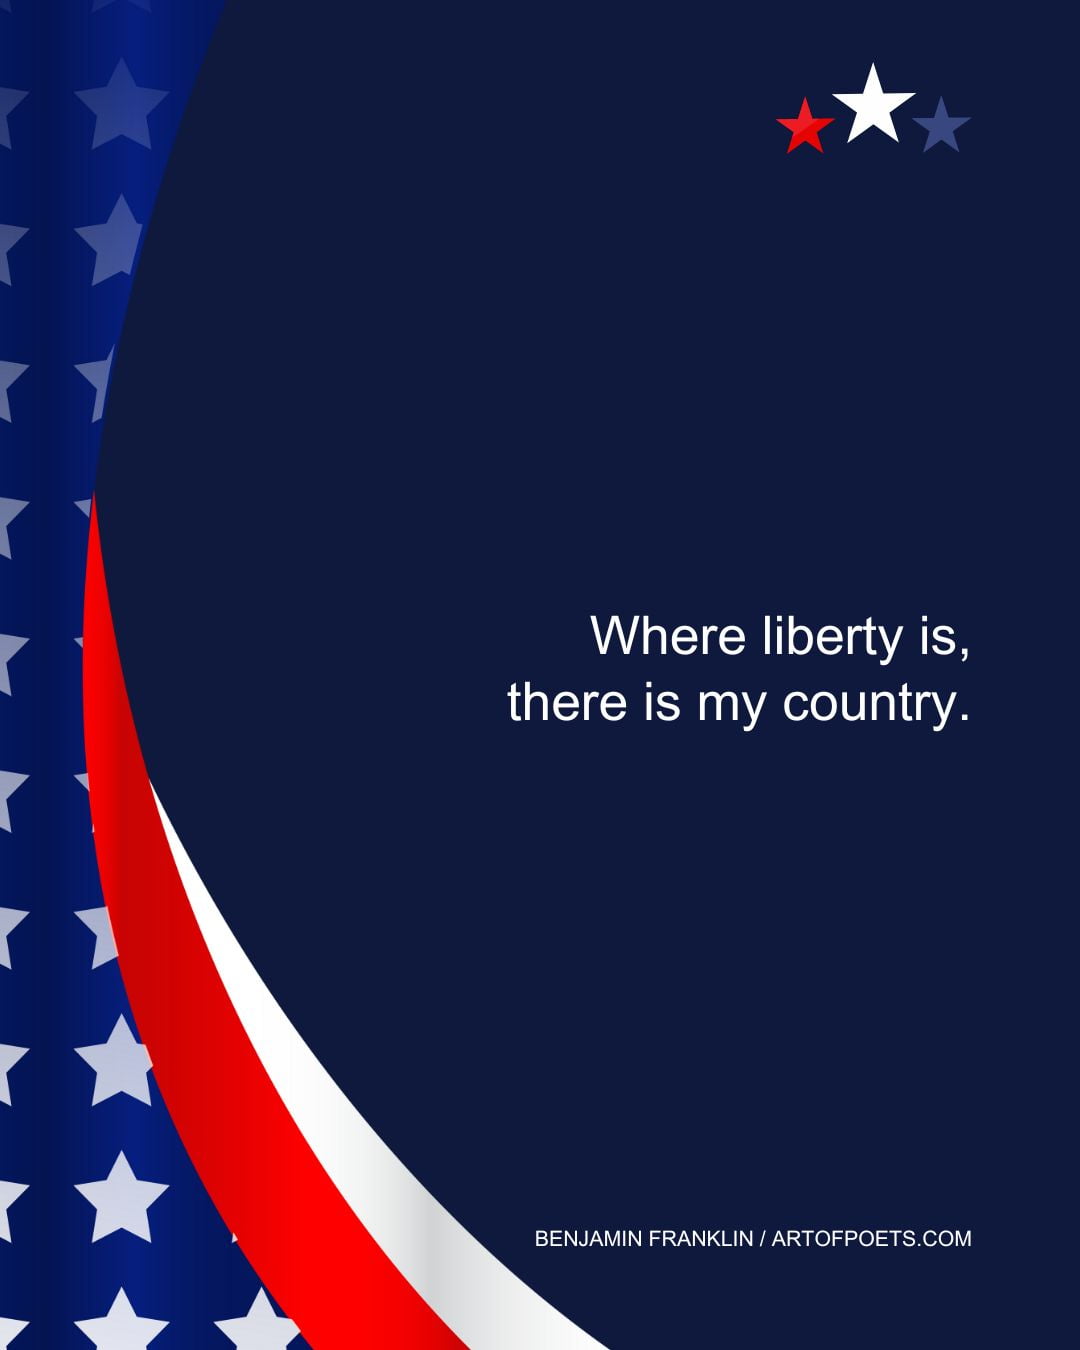 Where liberty is there is my country